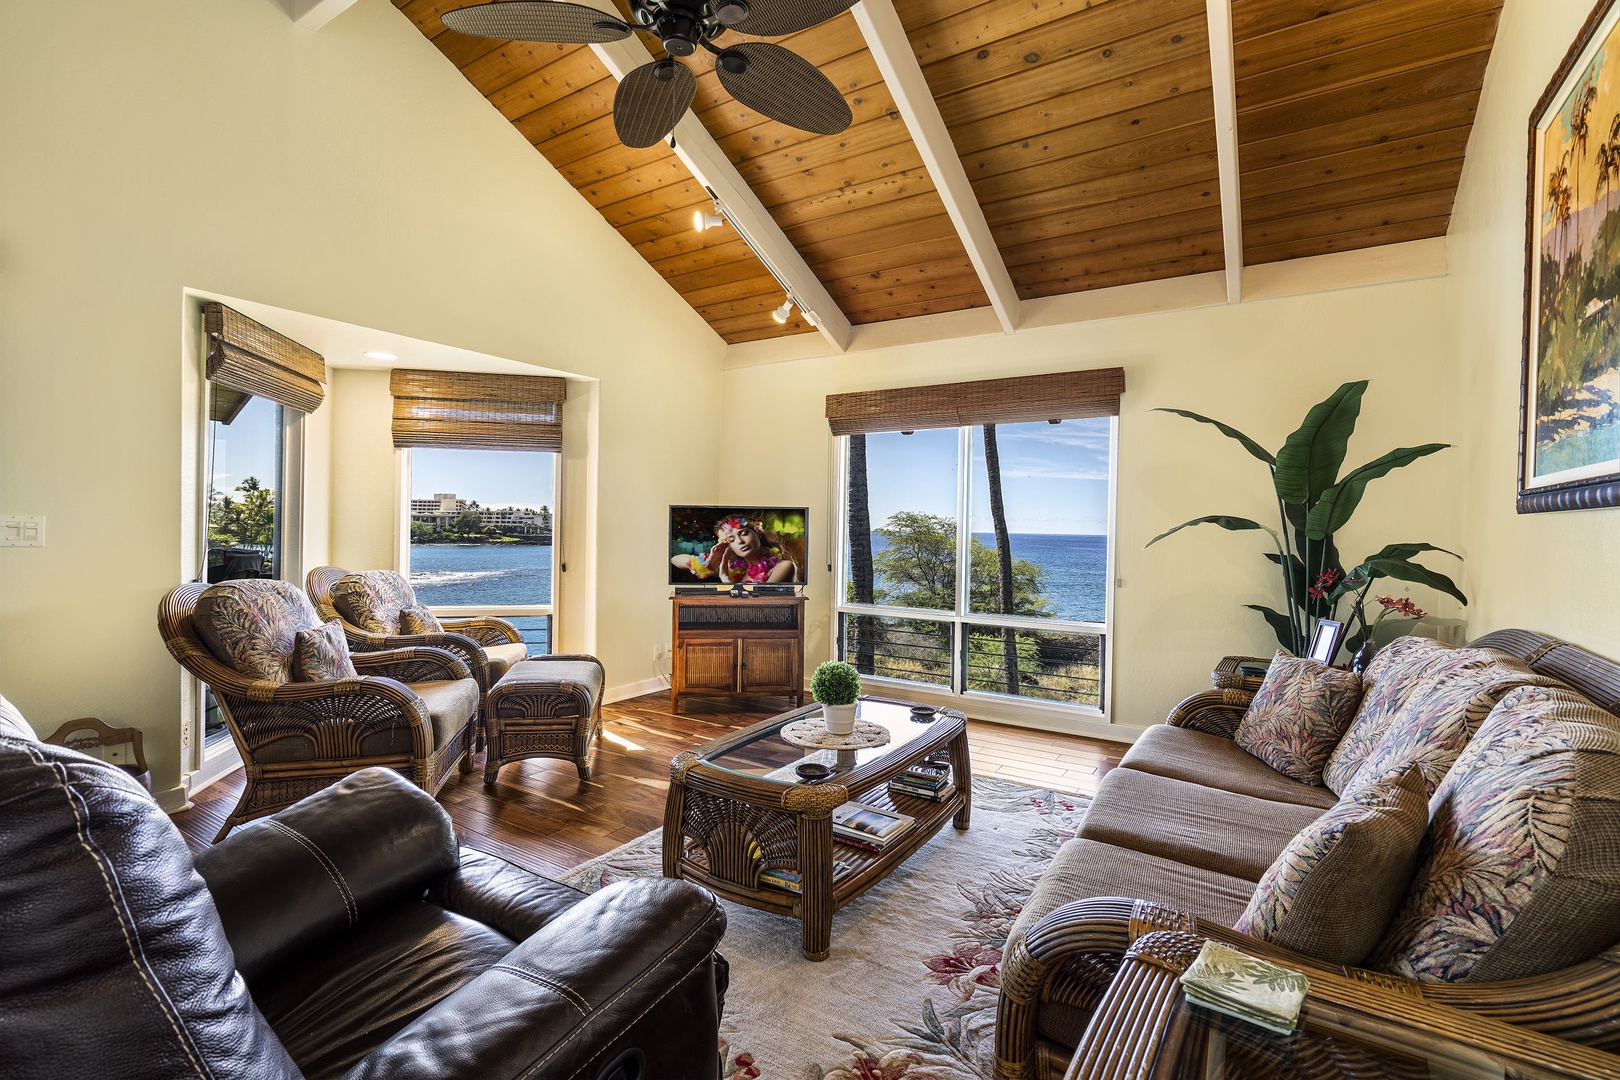 Kailua Kona Vacation Rentals, Kanaloa at Kona 3304 - Take your pick between watching the TV or the ocean in the distance